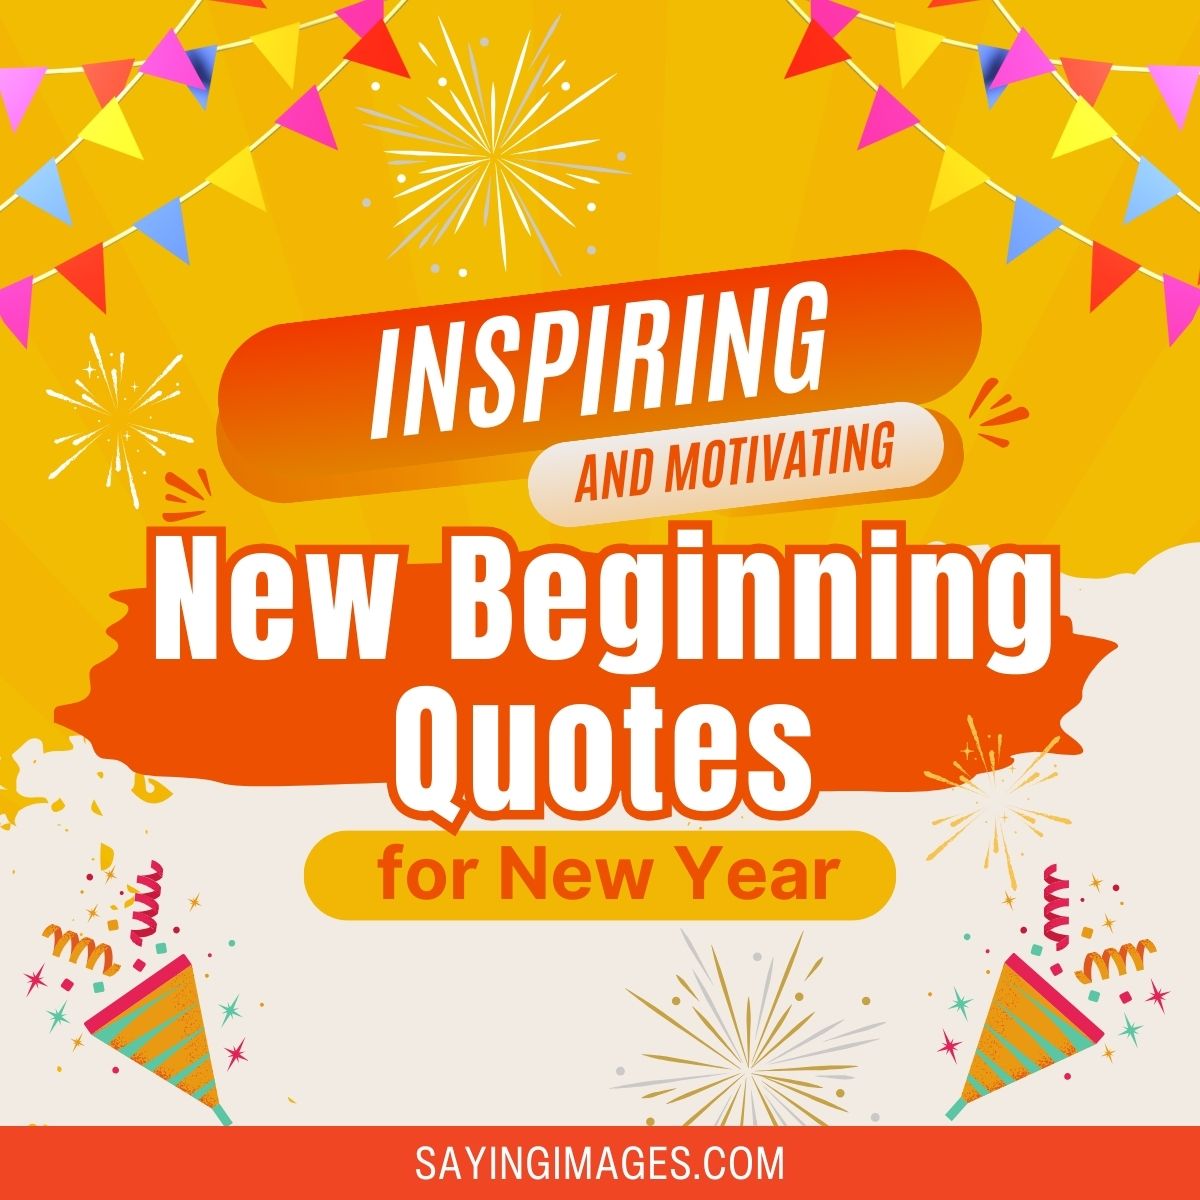 Motivating New Beginning Quotes for New Year